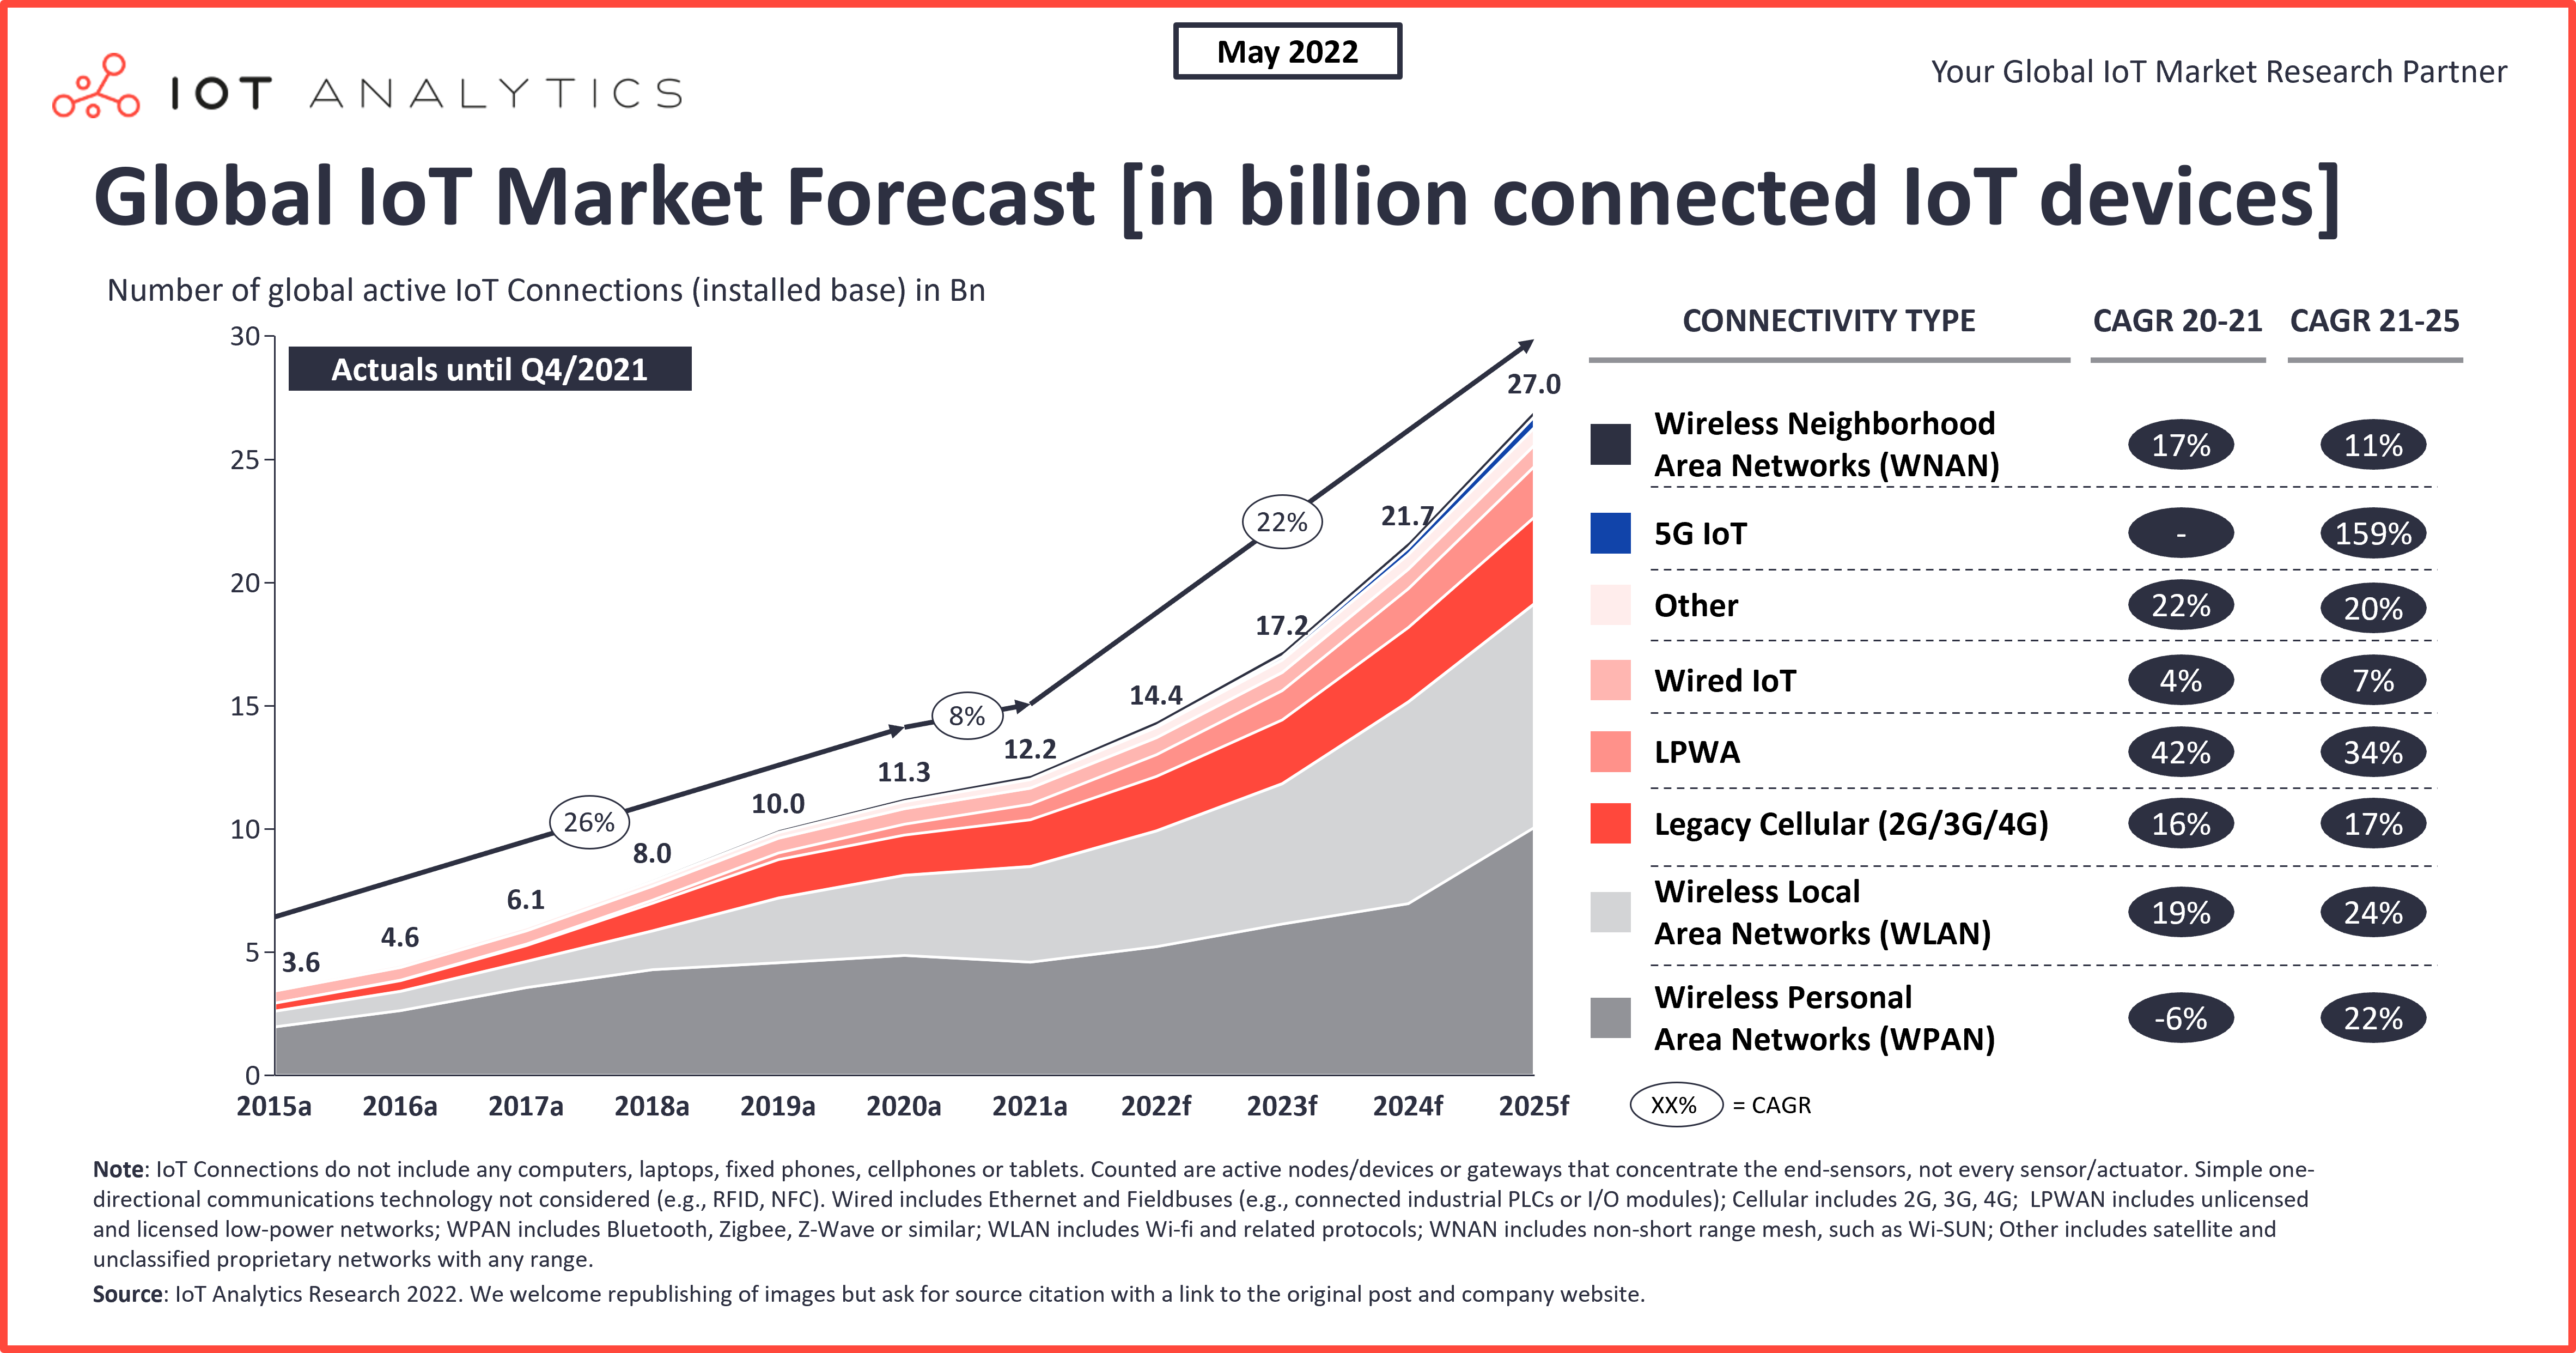 Global IoT Market Forecast - in billion connected iot devices